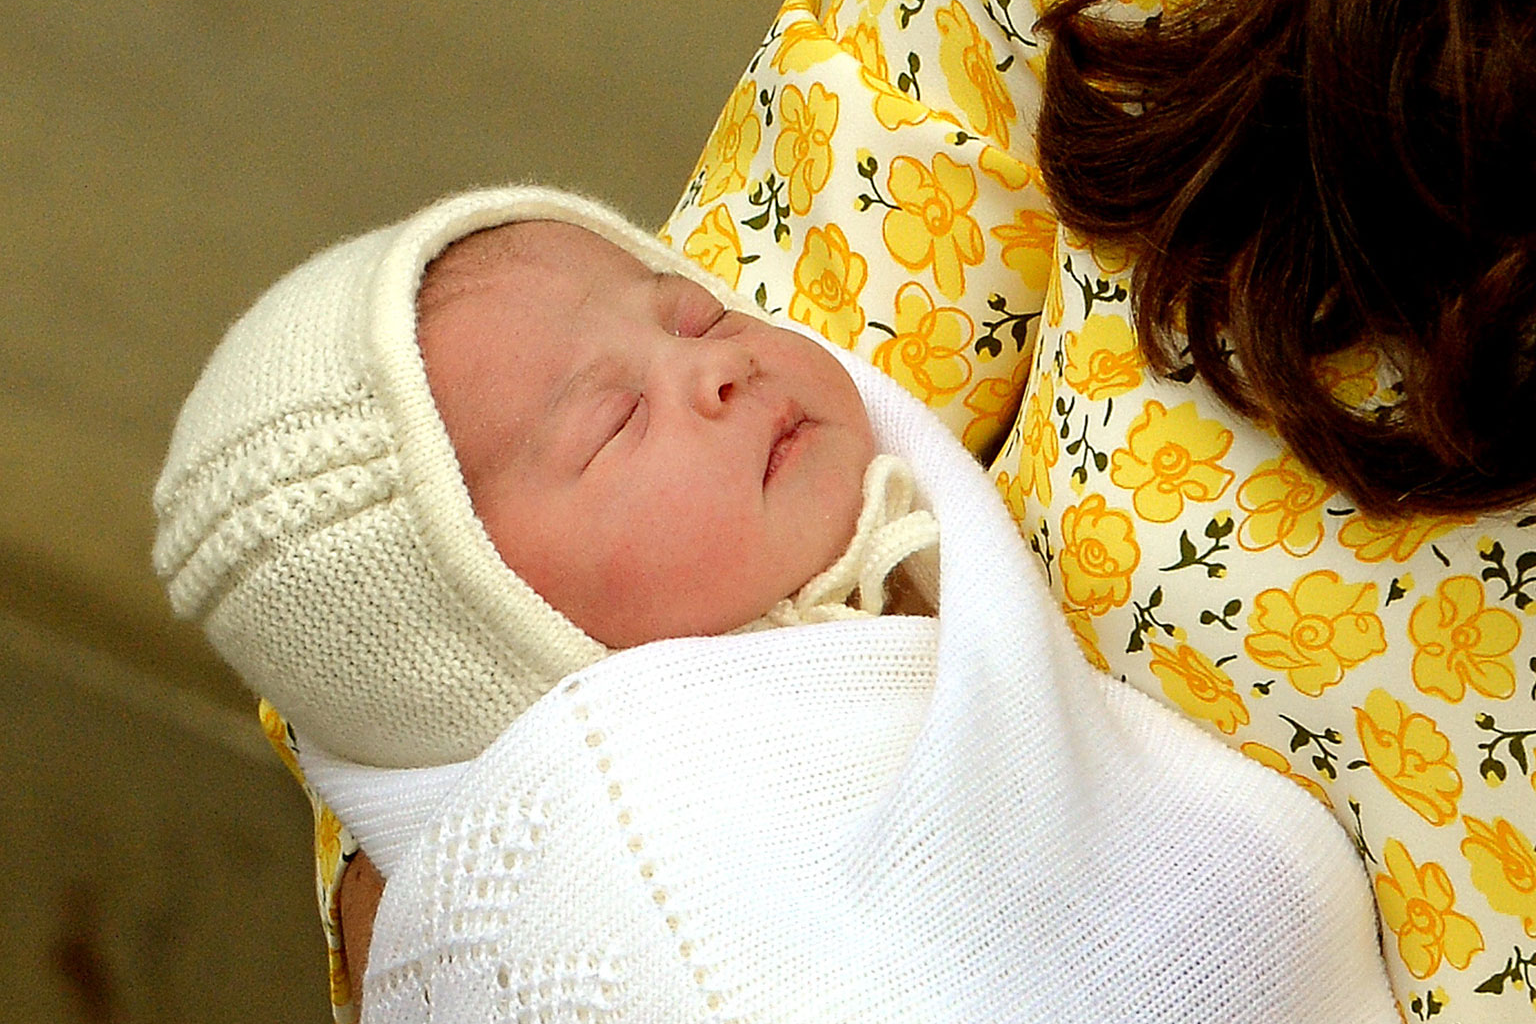 The new royal baby has name: Charlotte Elizabeth Diana